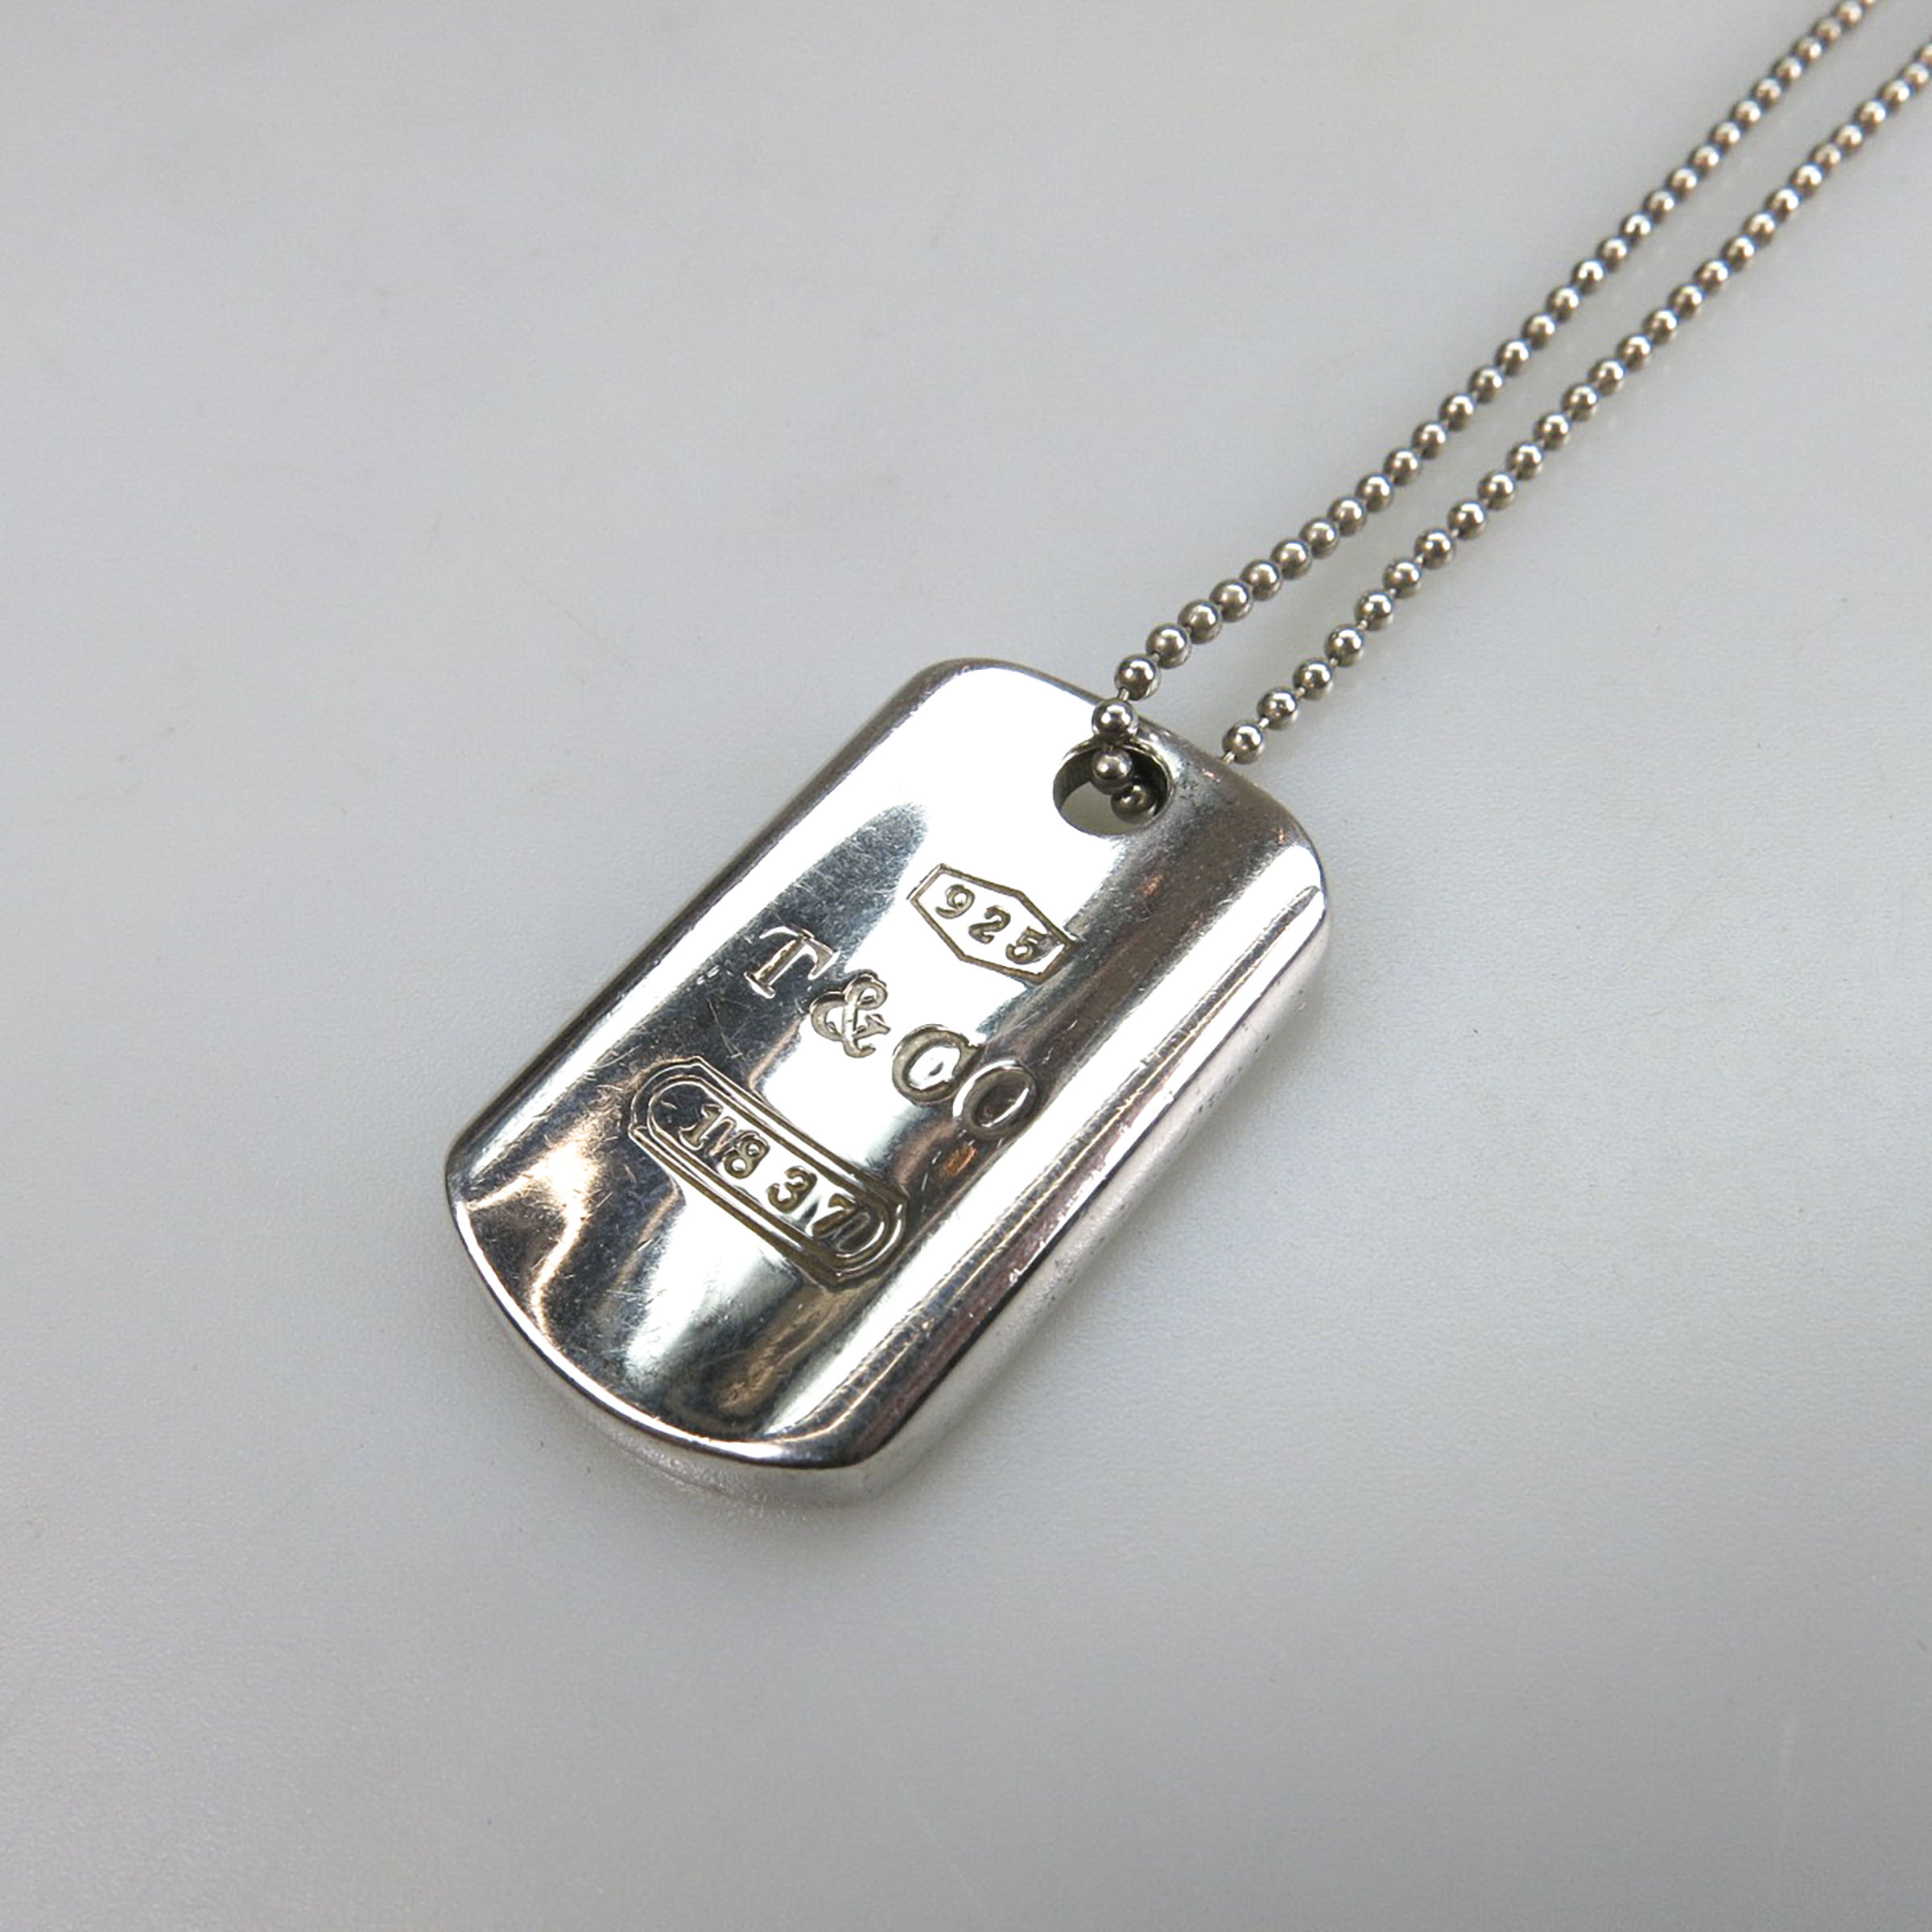 Tiffany & Co. Sterling Silver I.D. Tag Necklace